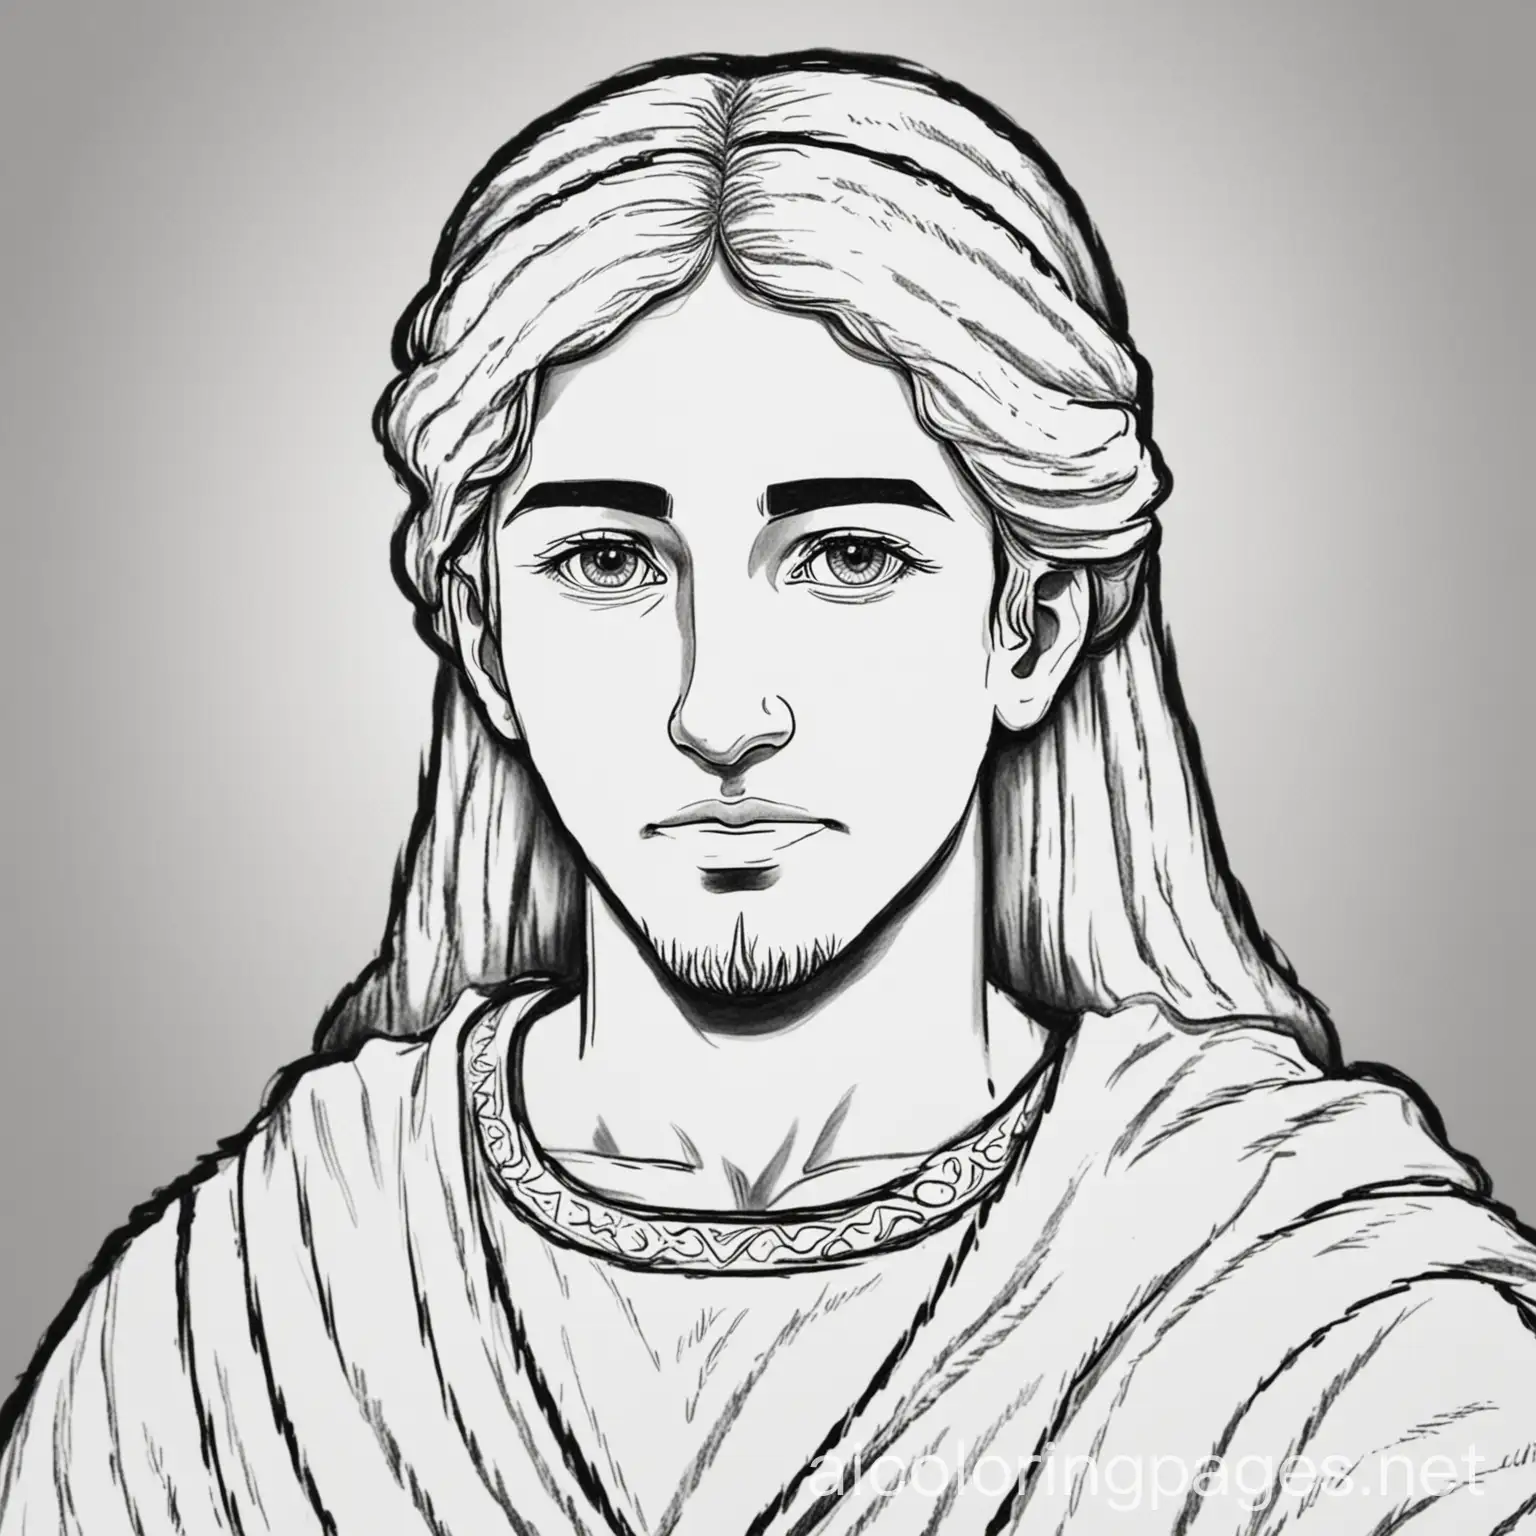 Jacob of the bible black and white coloring page no background, Coloring Page, black and white, line art, white background, Simplicity, Ample White Space. The background of the coloring page is plain white to make it easy for young children to color within the lines. The outlines of all the subjects are easy to distinguish, making it simple for kids to color without too much difficulty